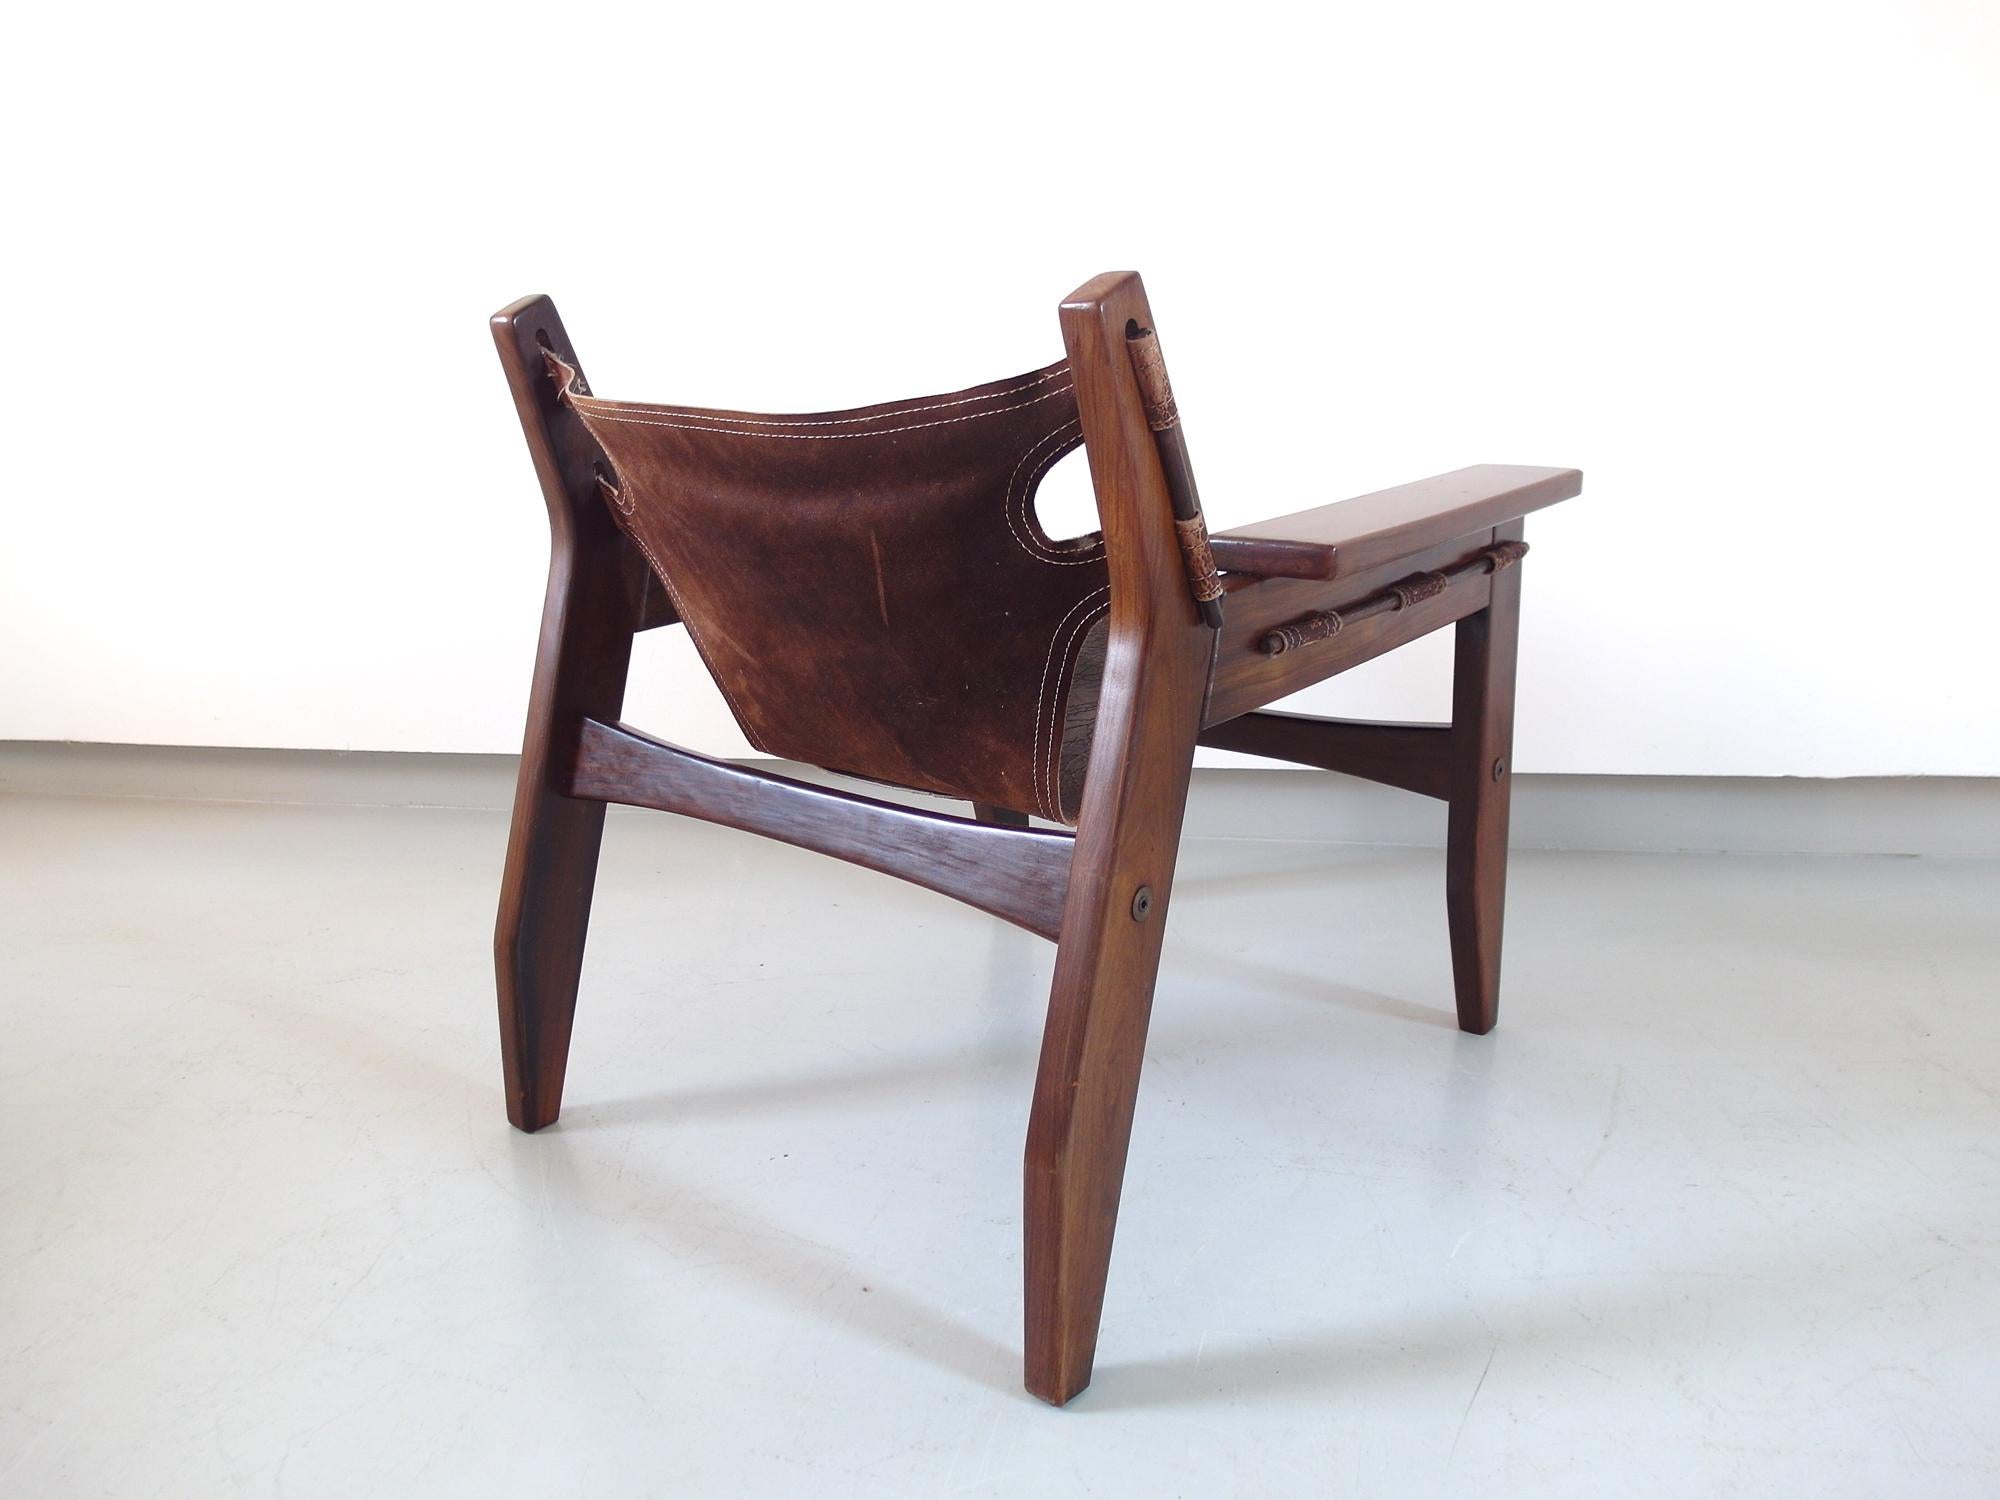 Pair of Sergio Rodrigues Kilin Lounge Chairs for Oca, Brazil, 1973 For Sale 7